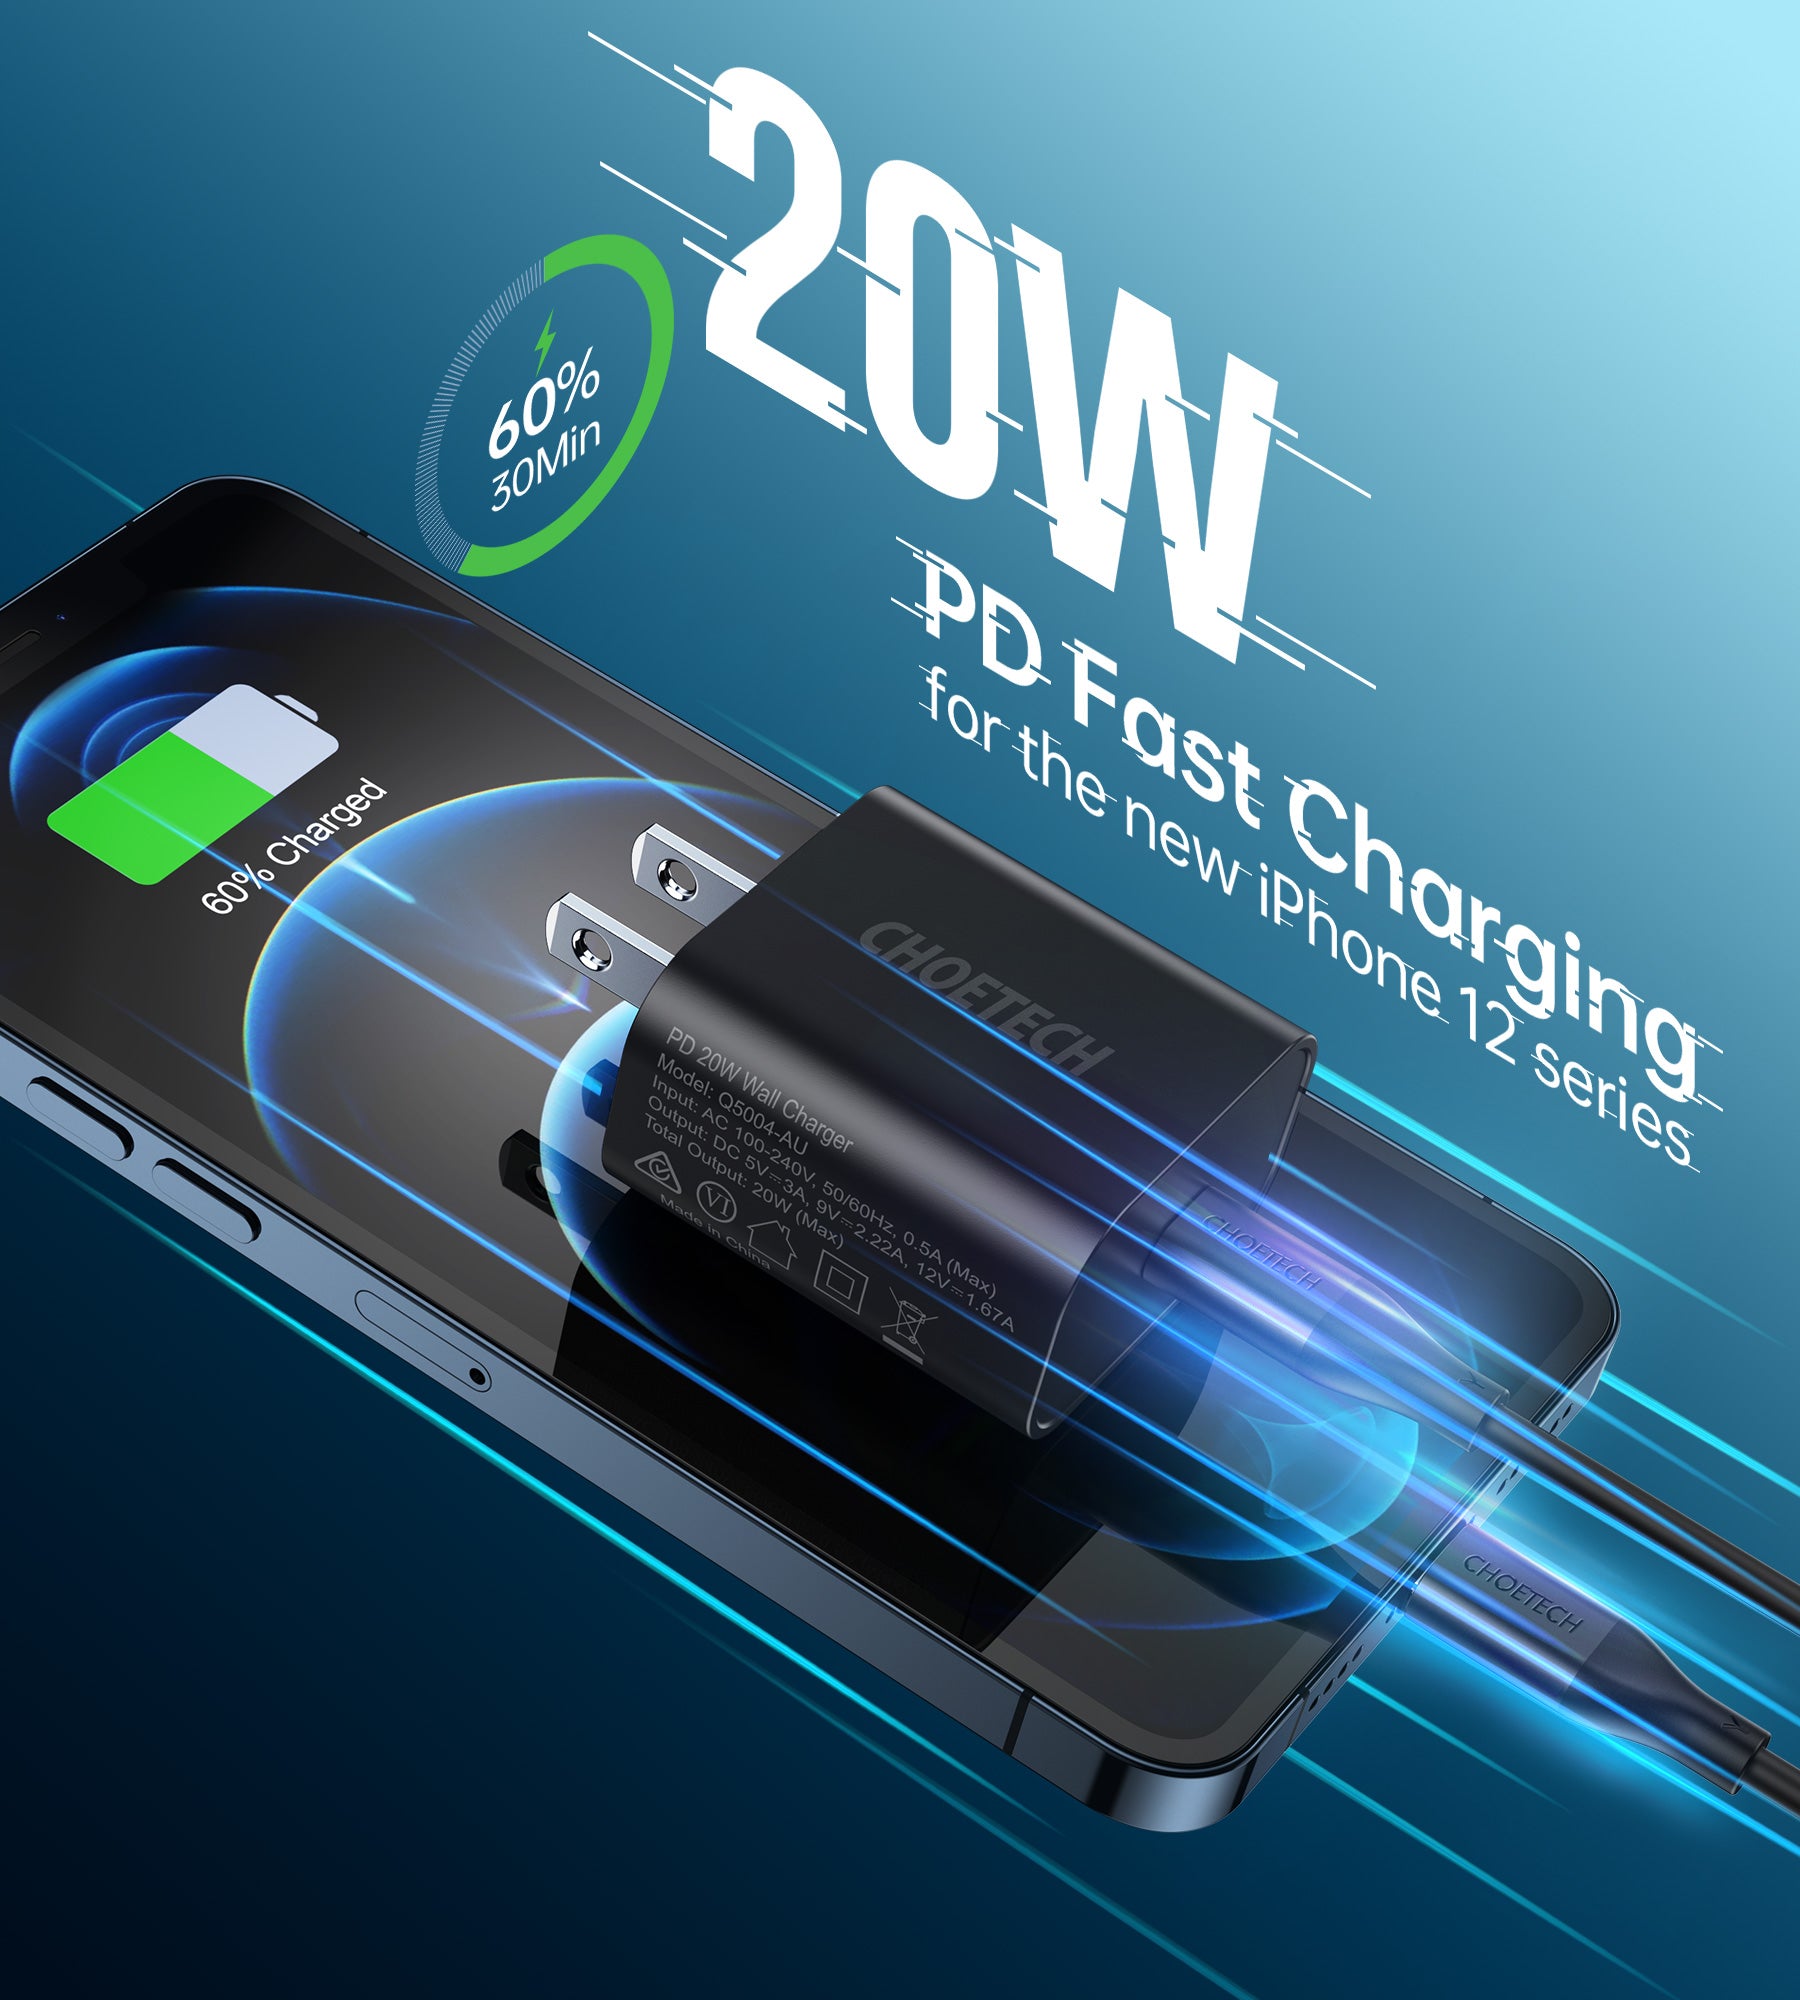 MIX00122 Chargeur USB C, CHOETECH 2-Pack PD Fast Charger 20W Type C Power Delivery 3.0 Chargeur Mural Compatible pour iPhone 12/12 Pro Max/12 Pro/12 Mini/11 Pro Max/SE/XS/XR/8, iPad Pro, Galaxy S20/S10, Pixel 5/4